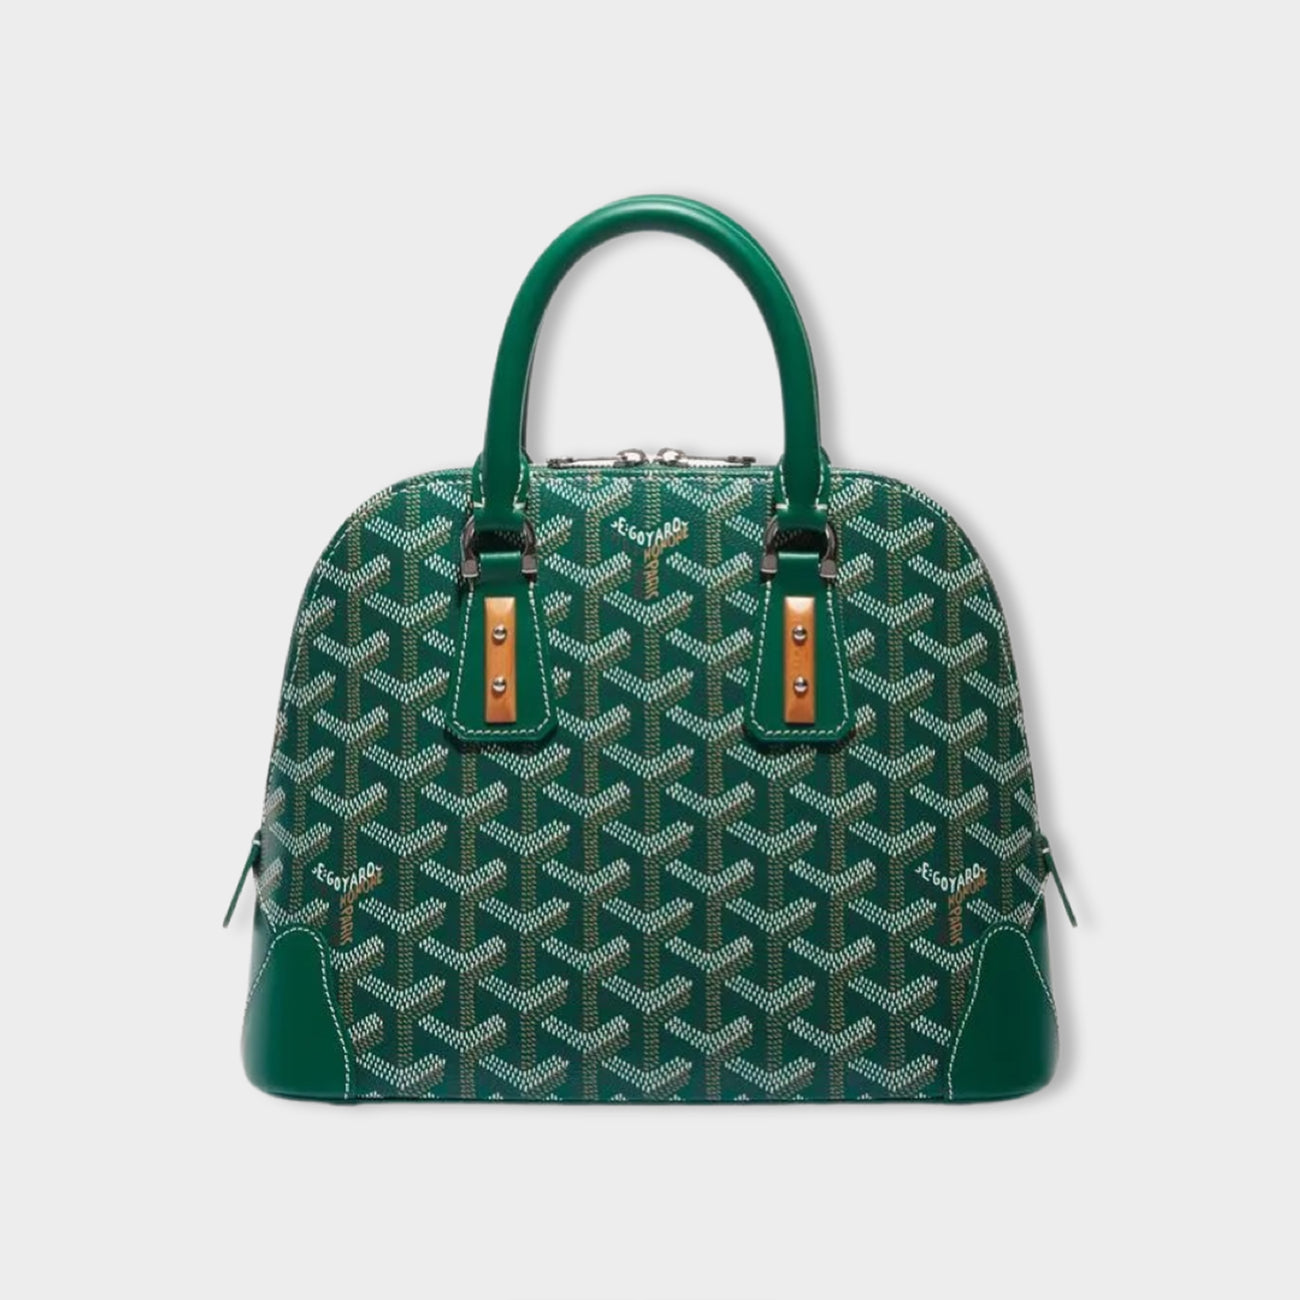 The Amazing GOYARD! - *Things to Know* about GOYARD Bags History